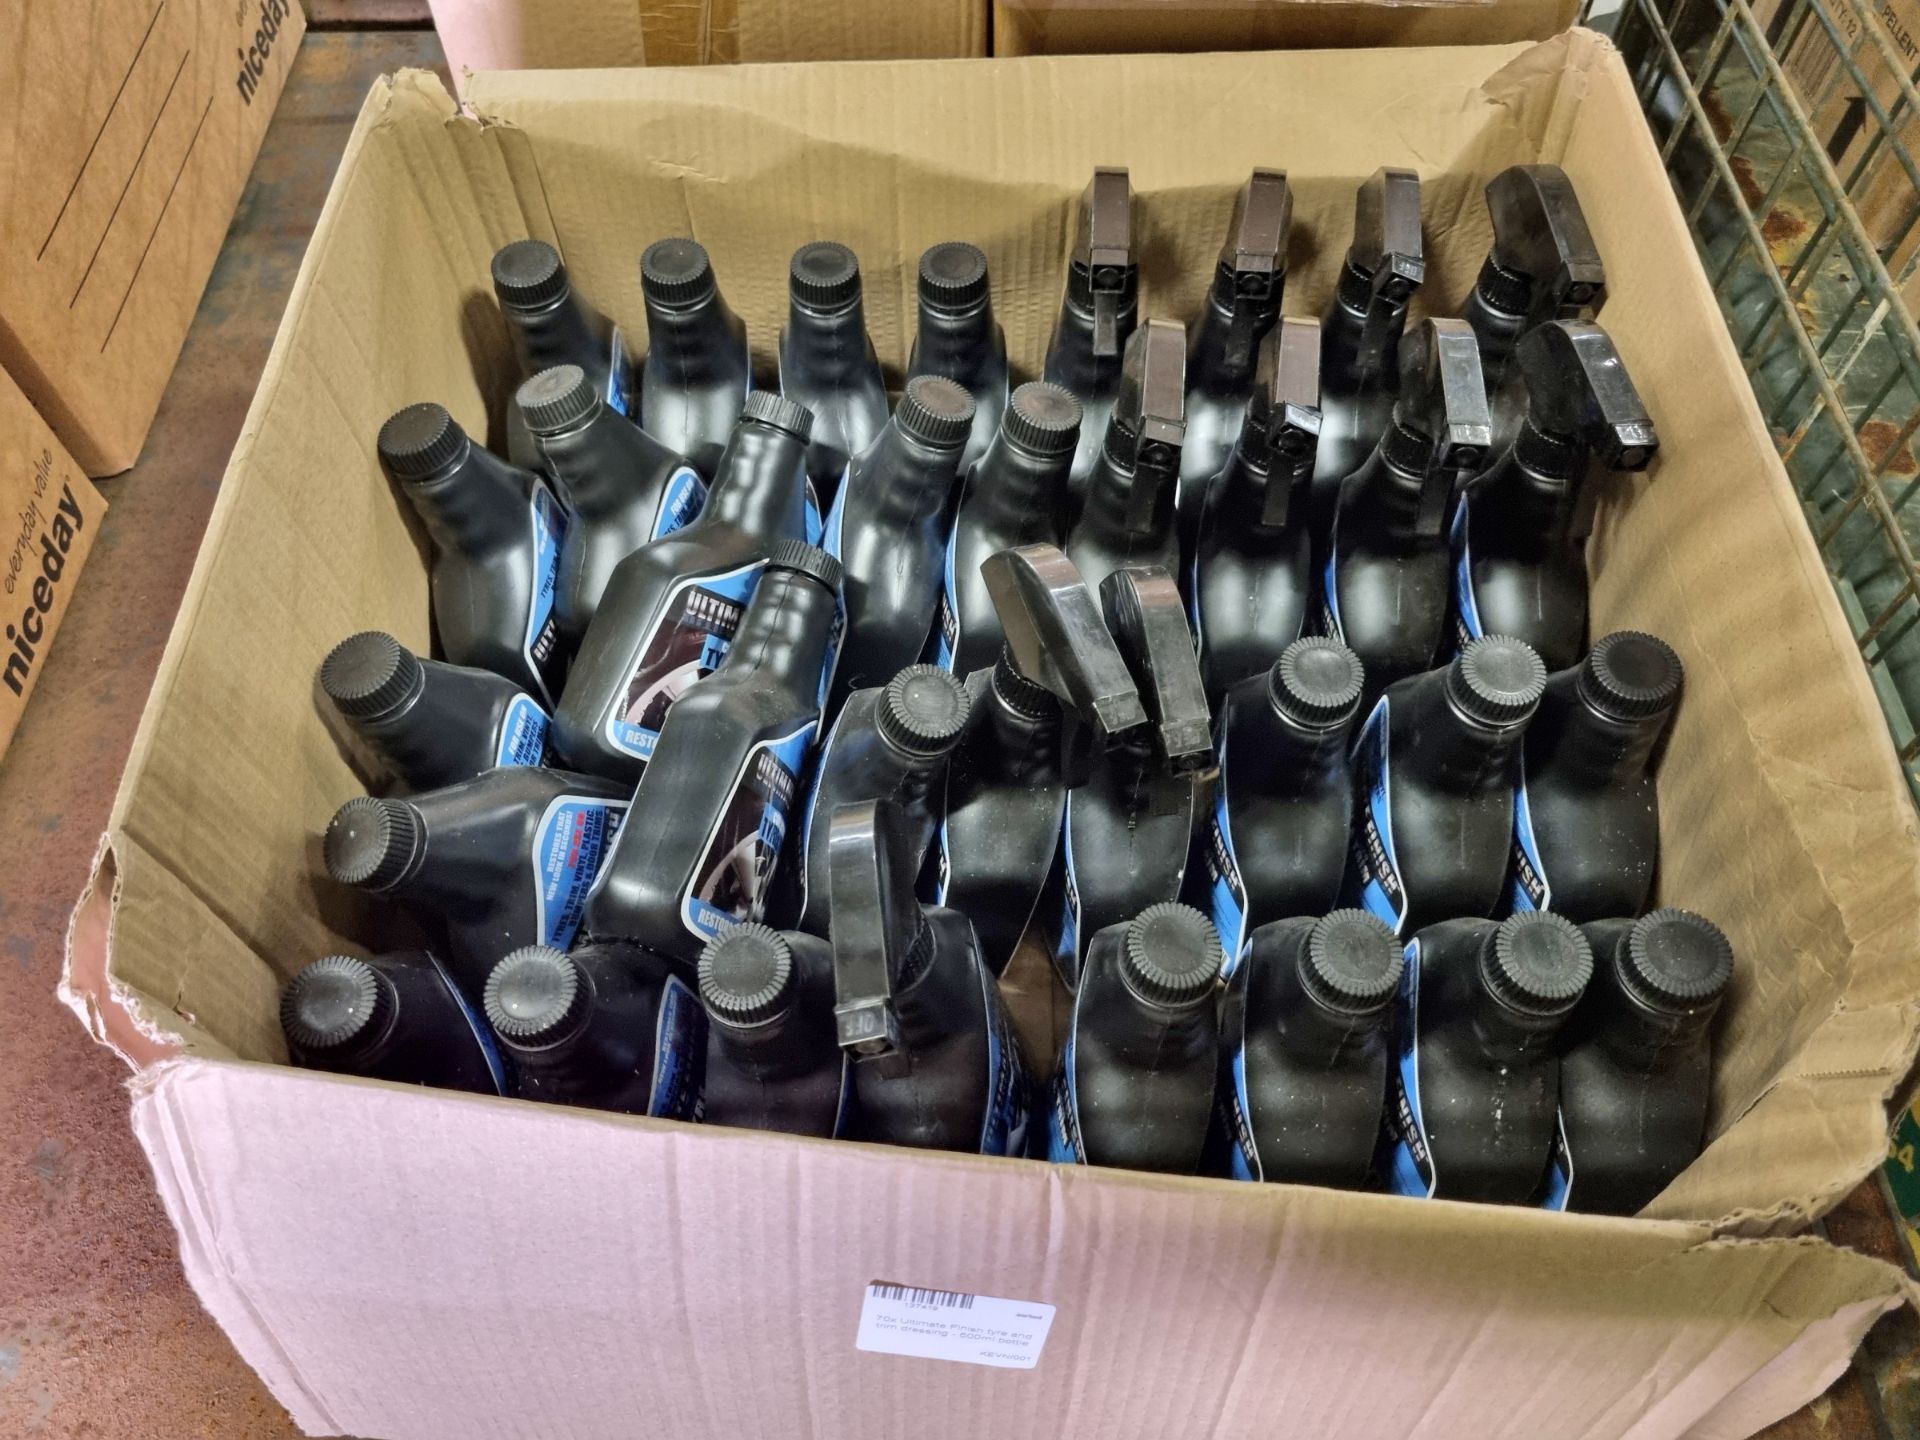 70x bottles of Ultimate Finish tyre and trim dressing - 500ml - Image 2 of 5